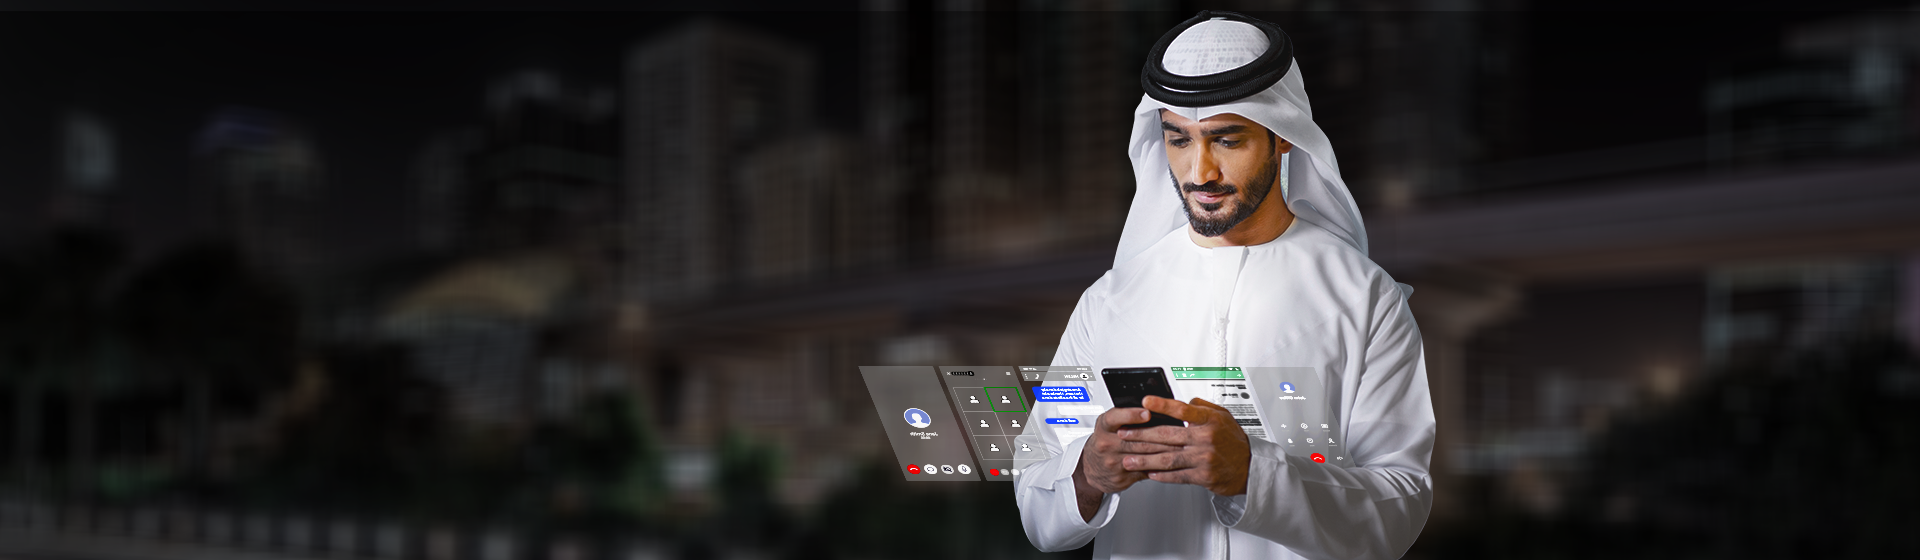 Boost your allowances and top up your mobile plan, your way with:”